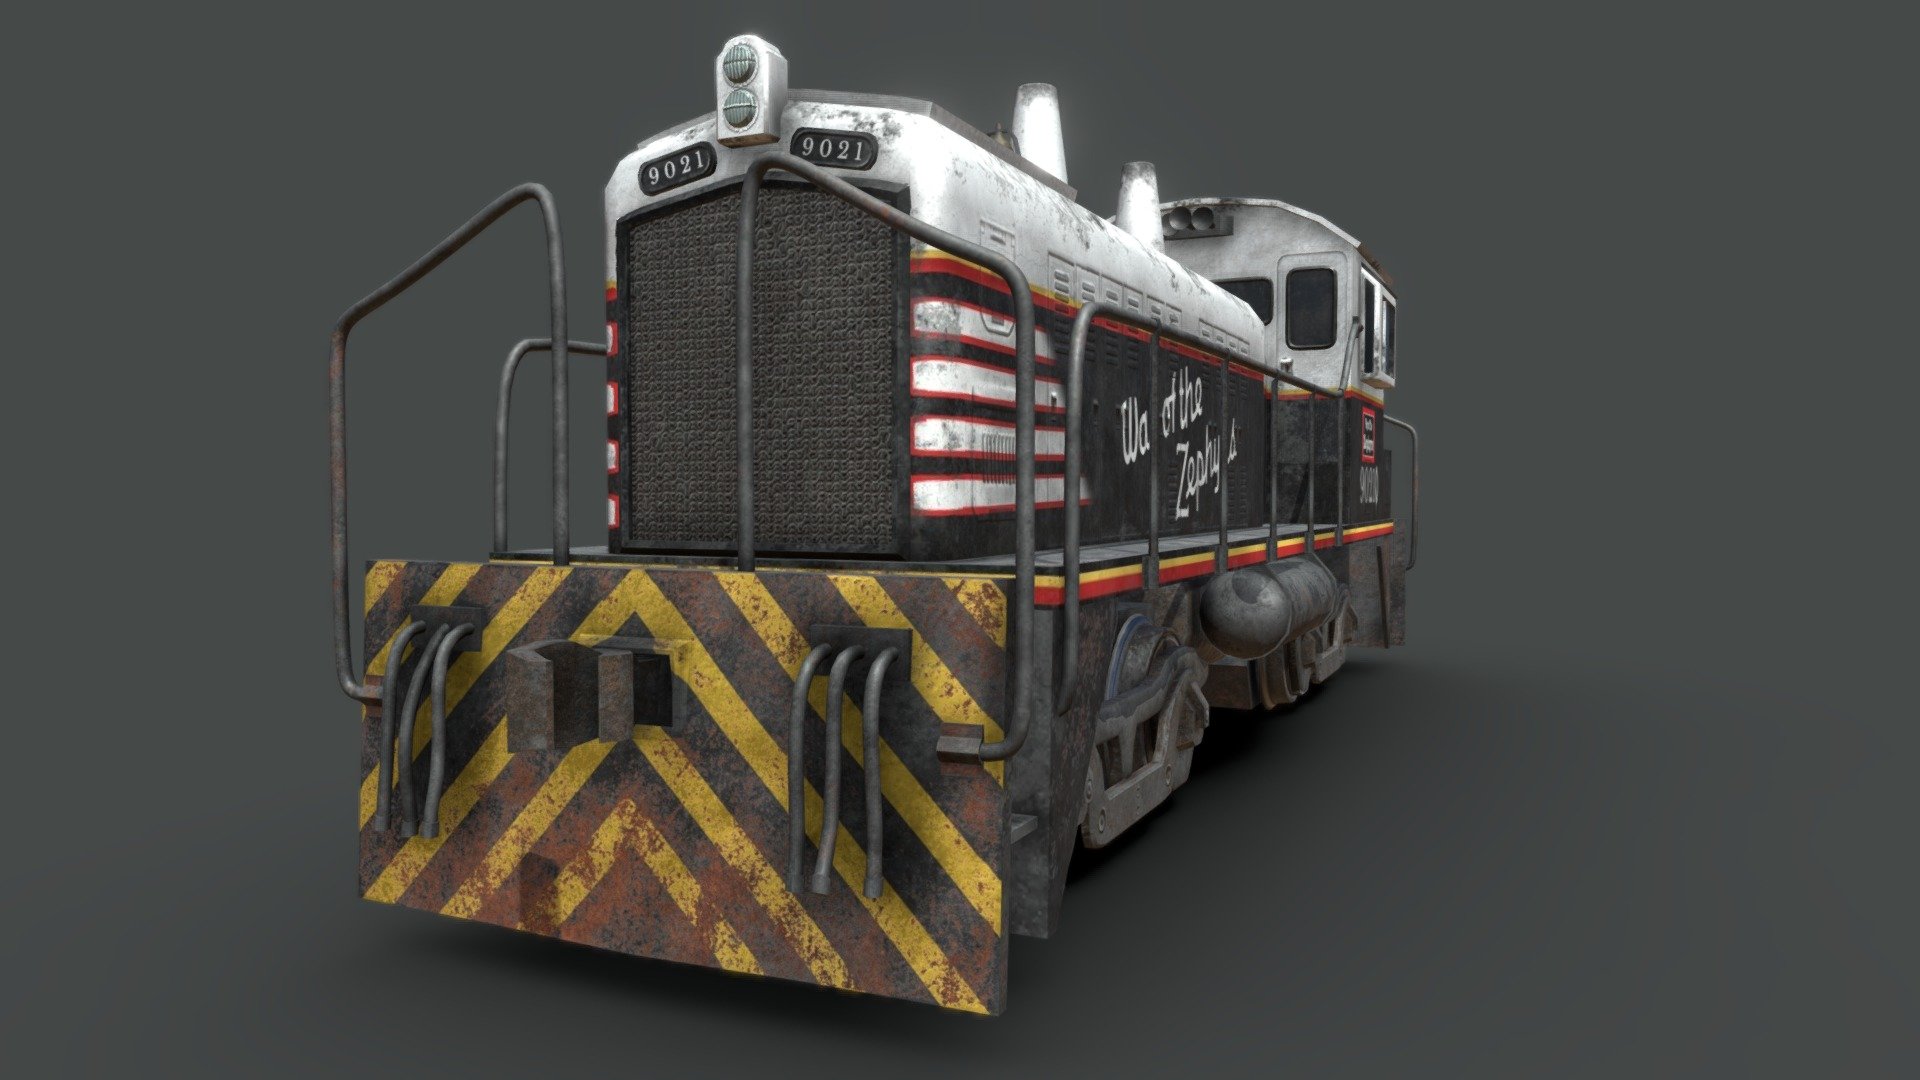 Low poly game ready model of a locomotive designed as a mashup of various EMD SW1200 variants. Painted in a Burlington Route livery (some liberties taken).

This is actually a remake of a model that was featured in one of the levels I created for No More Room in Hell, quirky details preserved. At the time I was not able to actually create 3d models properly and found a way to circumvent it by using Propper - an addon that allows one to create a Source Engine model using only the Hammer Editor. I thought this would be a great subject to test my abilities since there is an easy point of comparison with the original model. (Comparison pictures here: https://www.artstation.com/artwork/xJdygW)

Modelled in Blender and textured in Subtance Painter (Designer helped as usual).

On purchase, also includes a .blend along with the assorted materials used including a clean version along with just the grunge for use with custom liveries/paintjobs 3d model